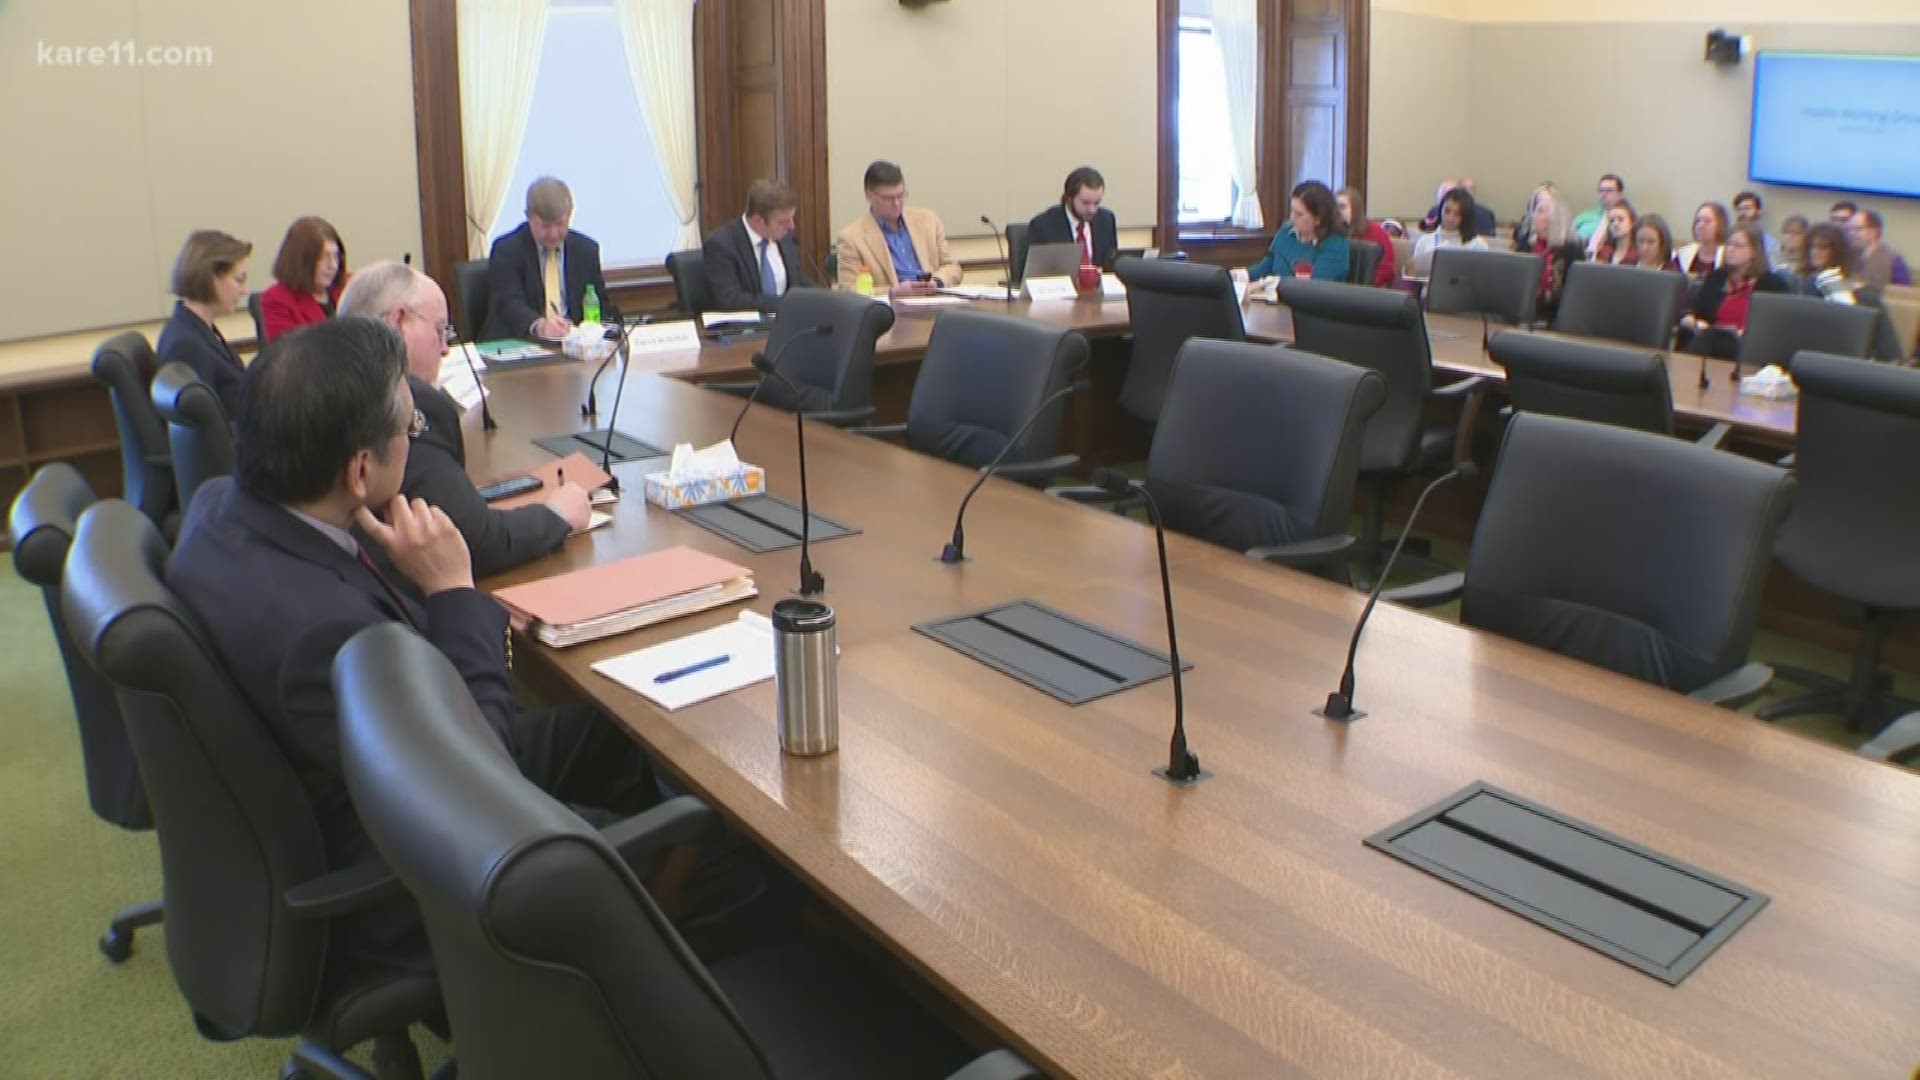 Lawmakers continue to work on drug affordability, access issues but are divided on key details.